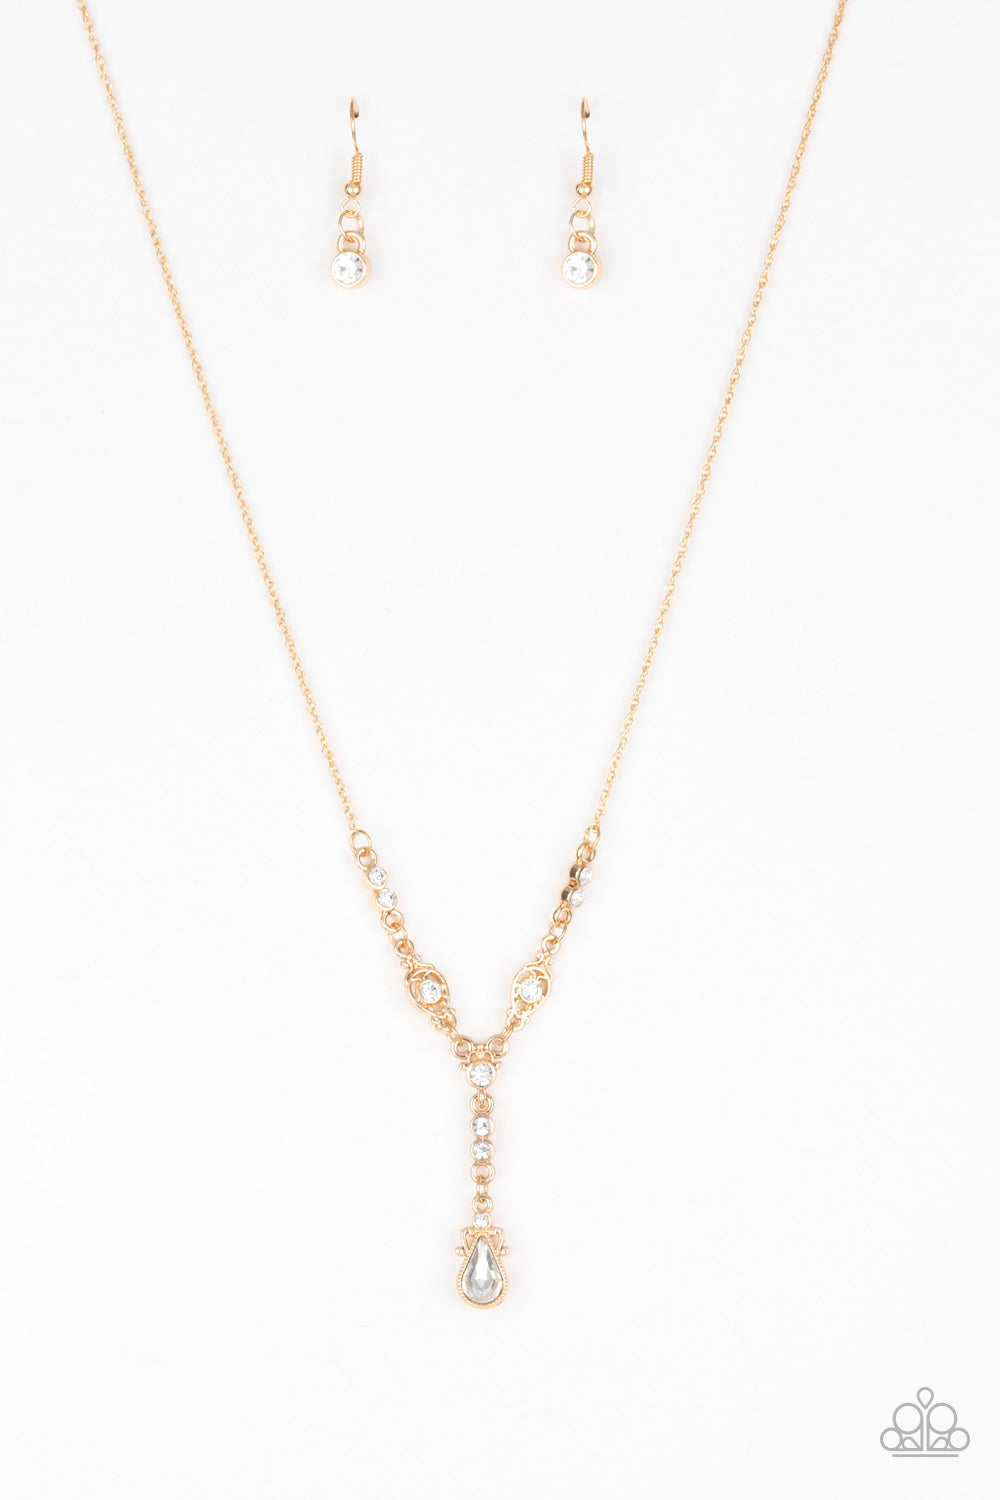 Dotted with glassy white rhinestones, dainty gold frames give away to an extravagant teardrop rhinestone pendant below the collar for a glamorous look. Features an adjustable clasp closure.